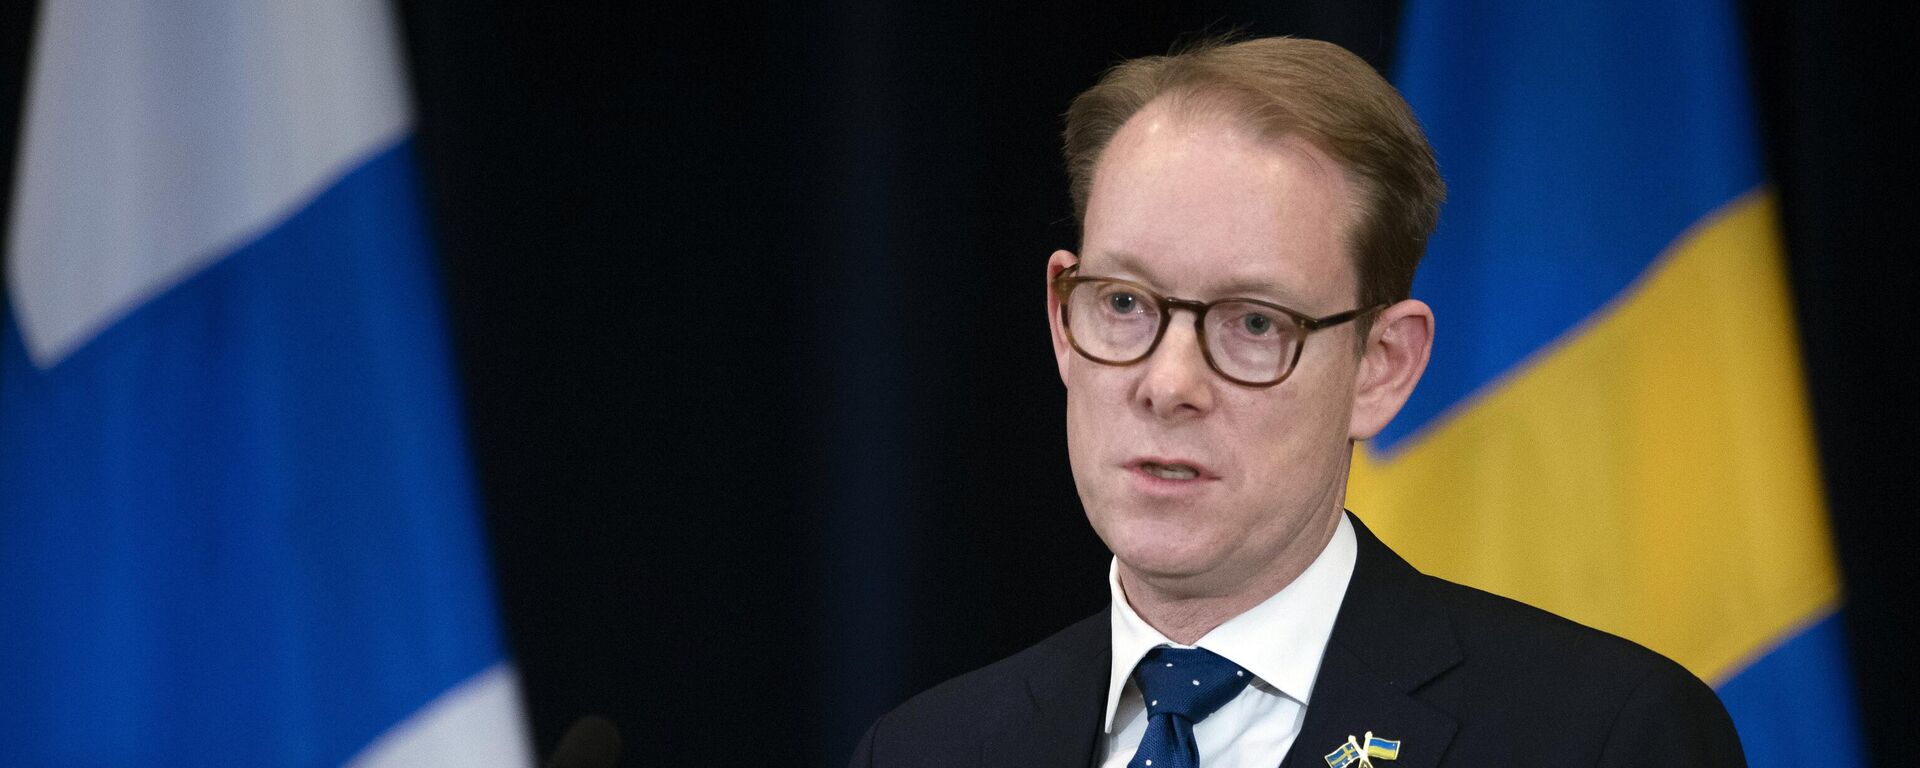 Swedish Foreign Minister Tobias Billstrom speaks during a news conference at the State Department, in Washington, Thursday, Dec. 8, 2022. - Sputnik International, 1920, 20.03.2023